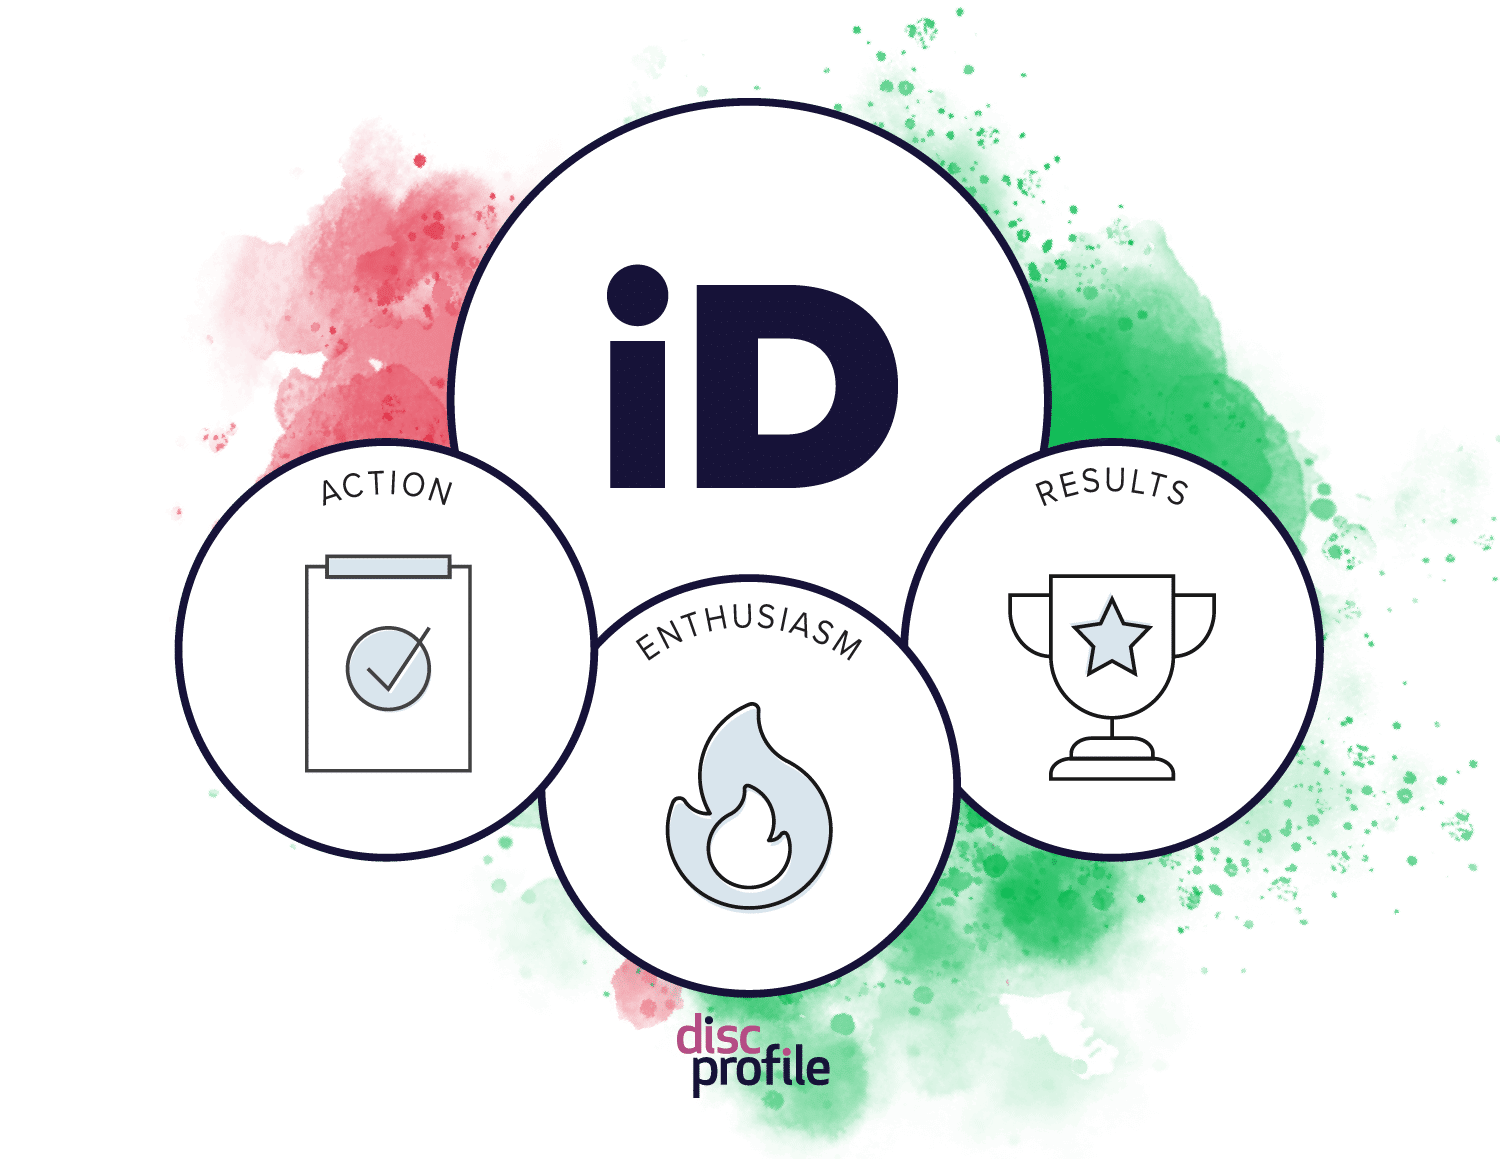 iD style image with these priorities: action, enthusiasm, and results